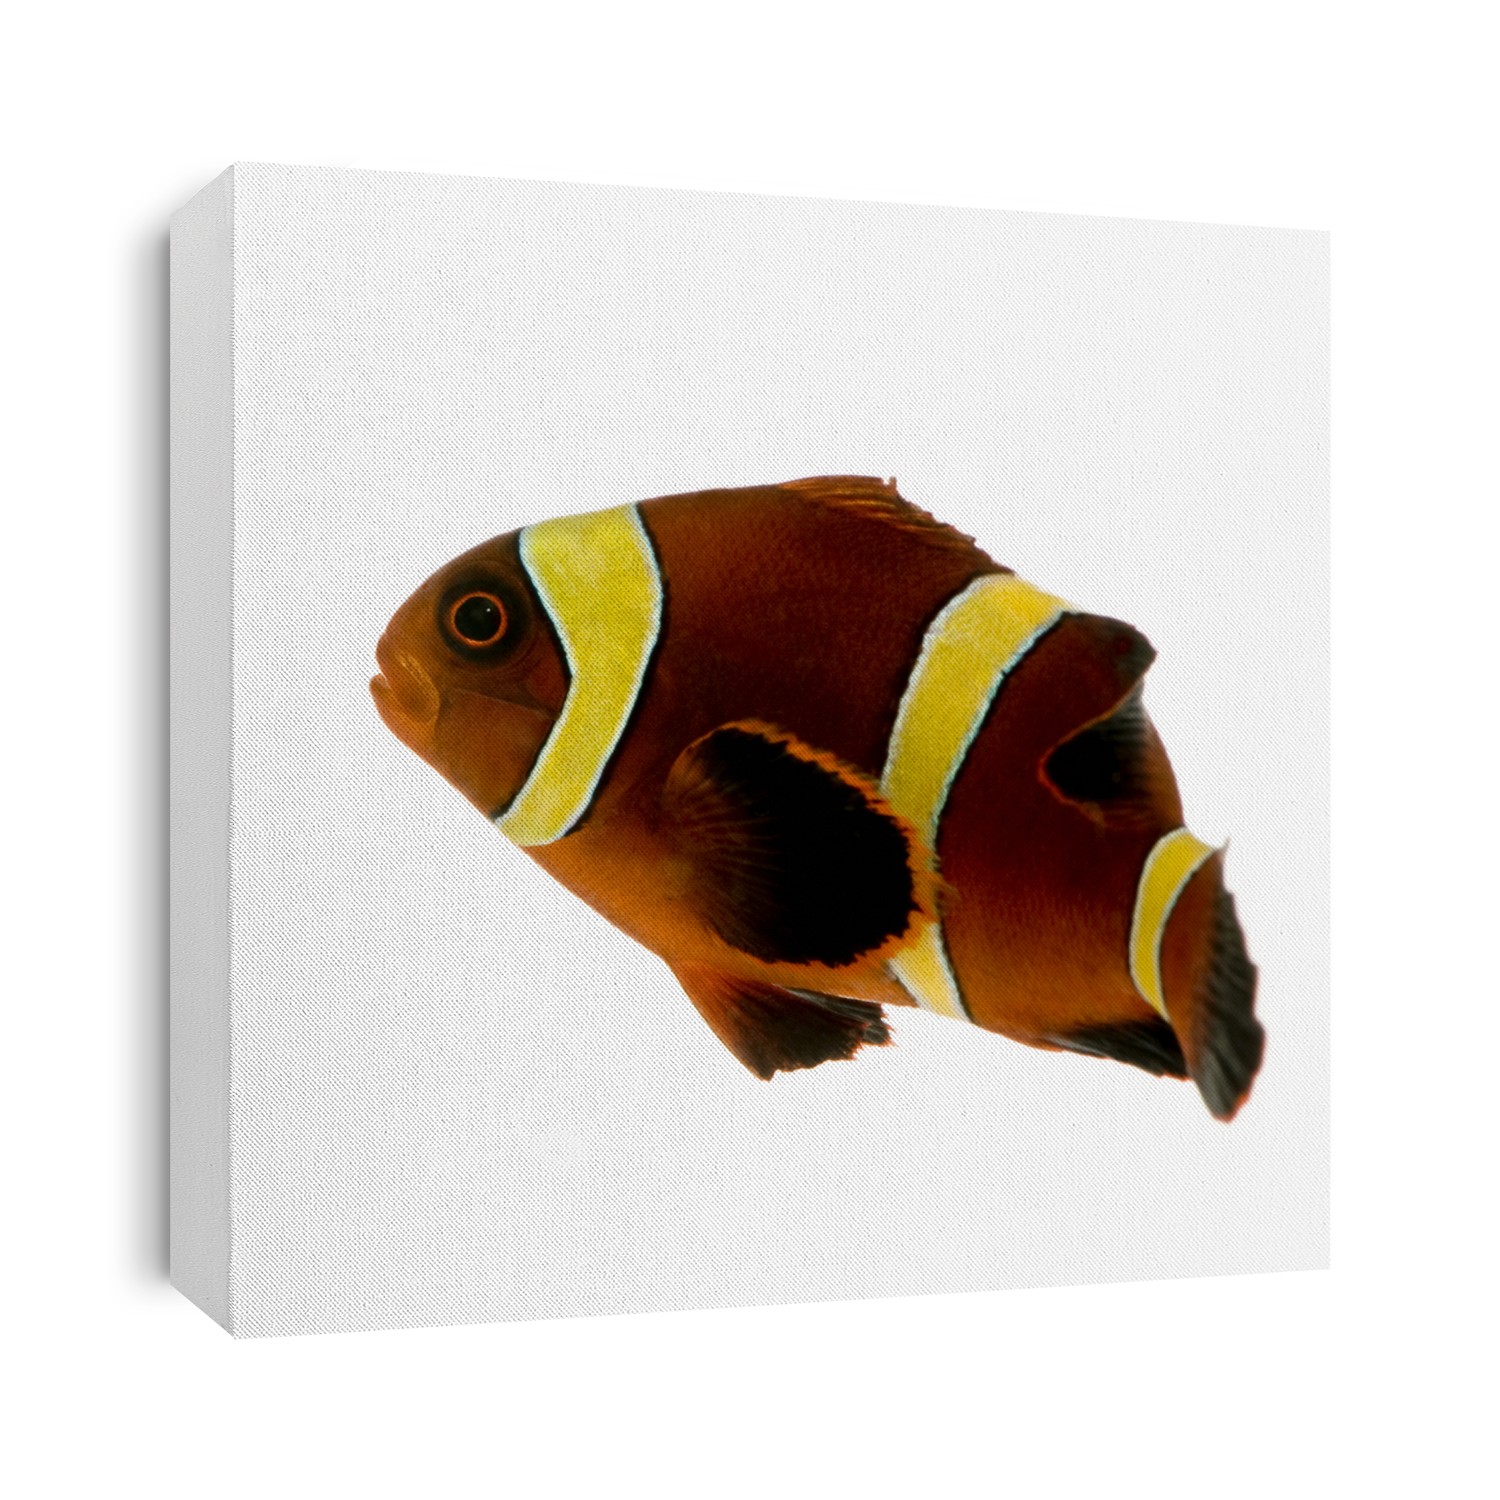 Gold stripe Maroon Clownfish - Premnas biaculeatus in front of a white background